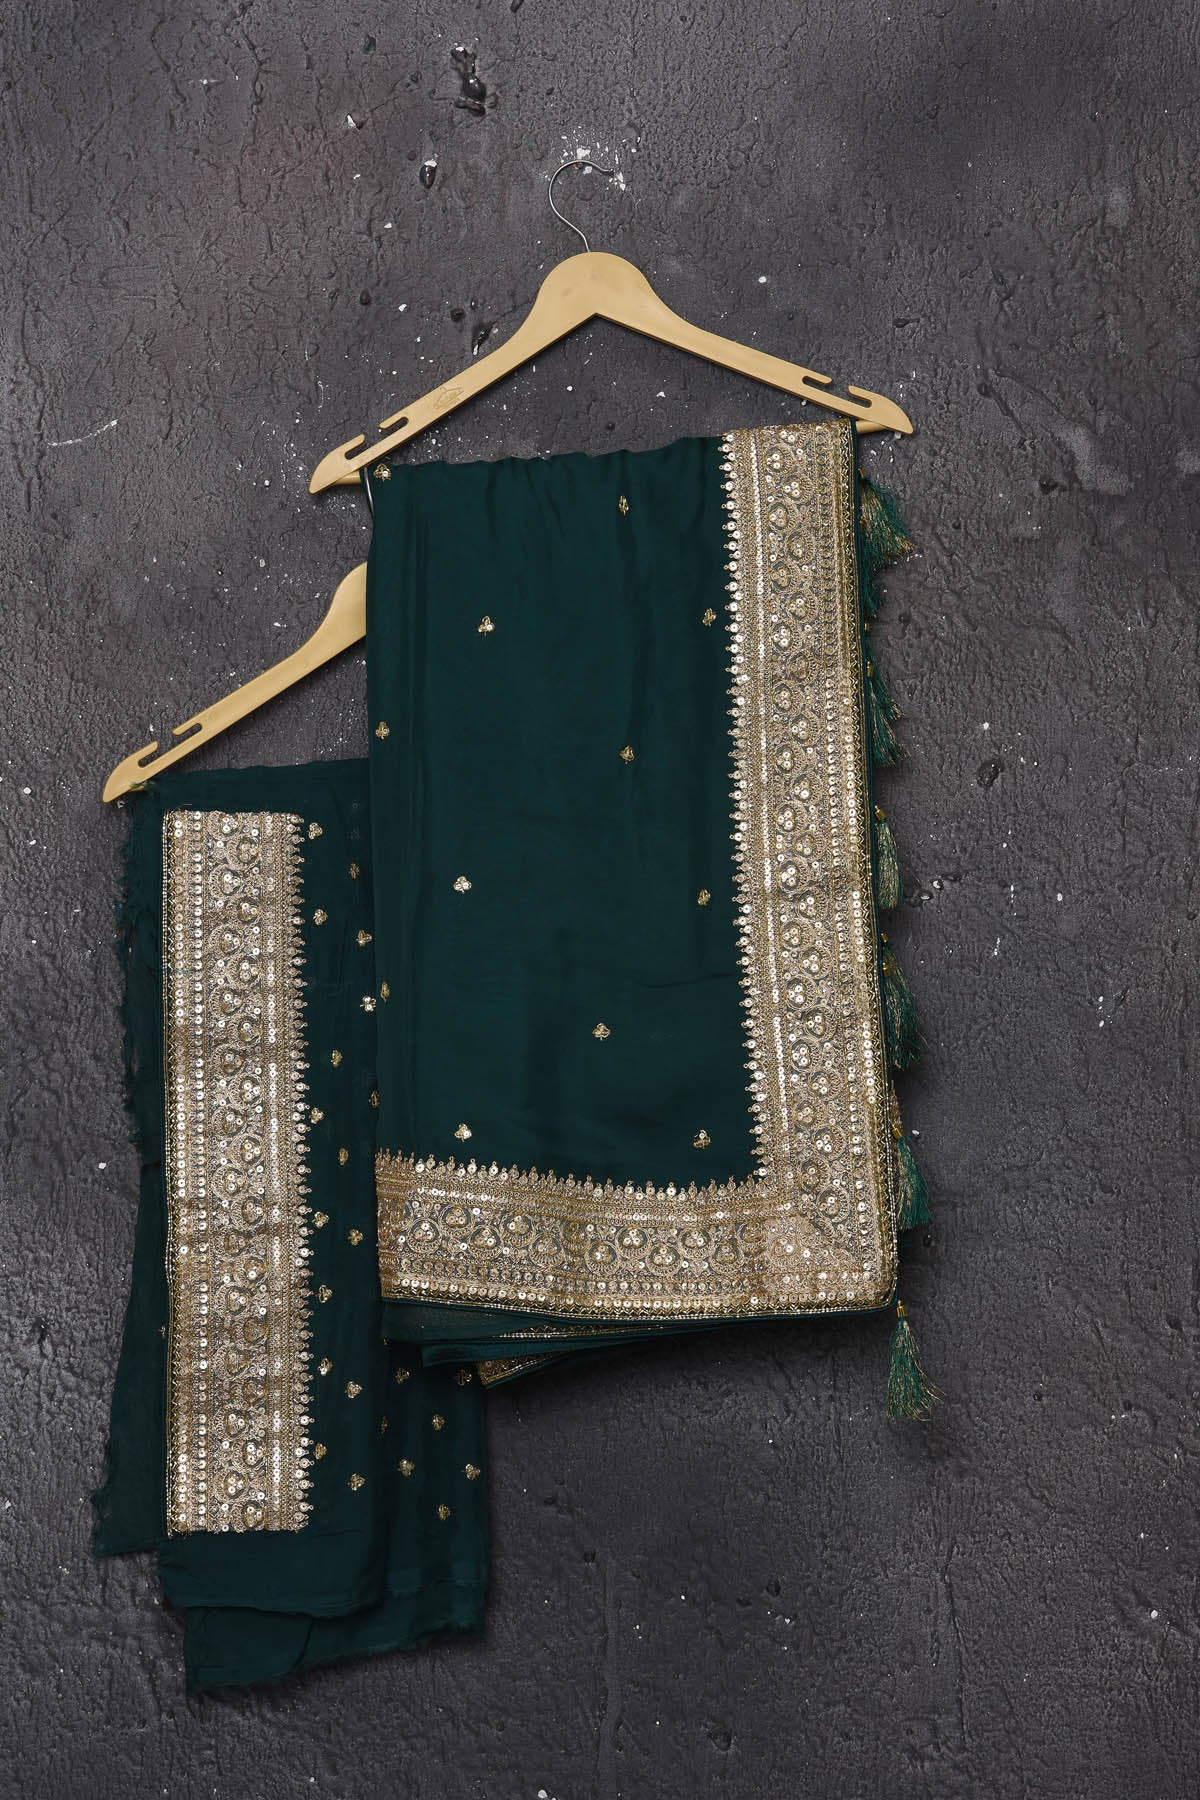 Buy exquisite pine green georgette banarasi designer saree with golden heavy Border online in USA which has crafted by skilled weaver of Banaras with elegance and grace, this saree is definitely the epitome of beauty and a must have in your collection. Buy designer handwoven banarasi georgette sari with any blouse from Pure Elegance Indian saree store in USA.-Unstitched blouse.